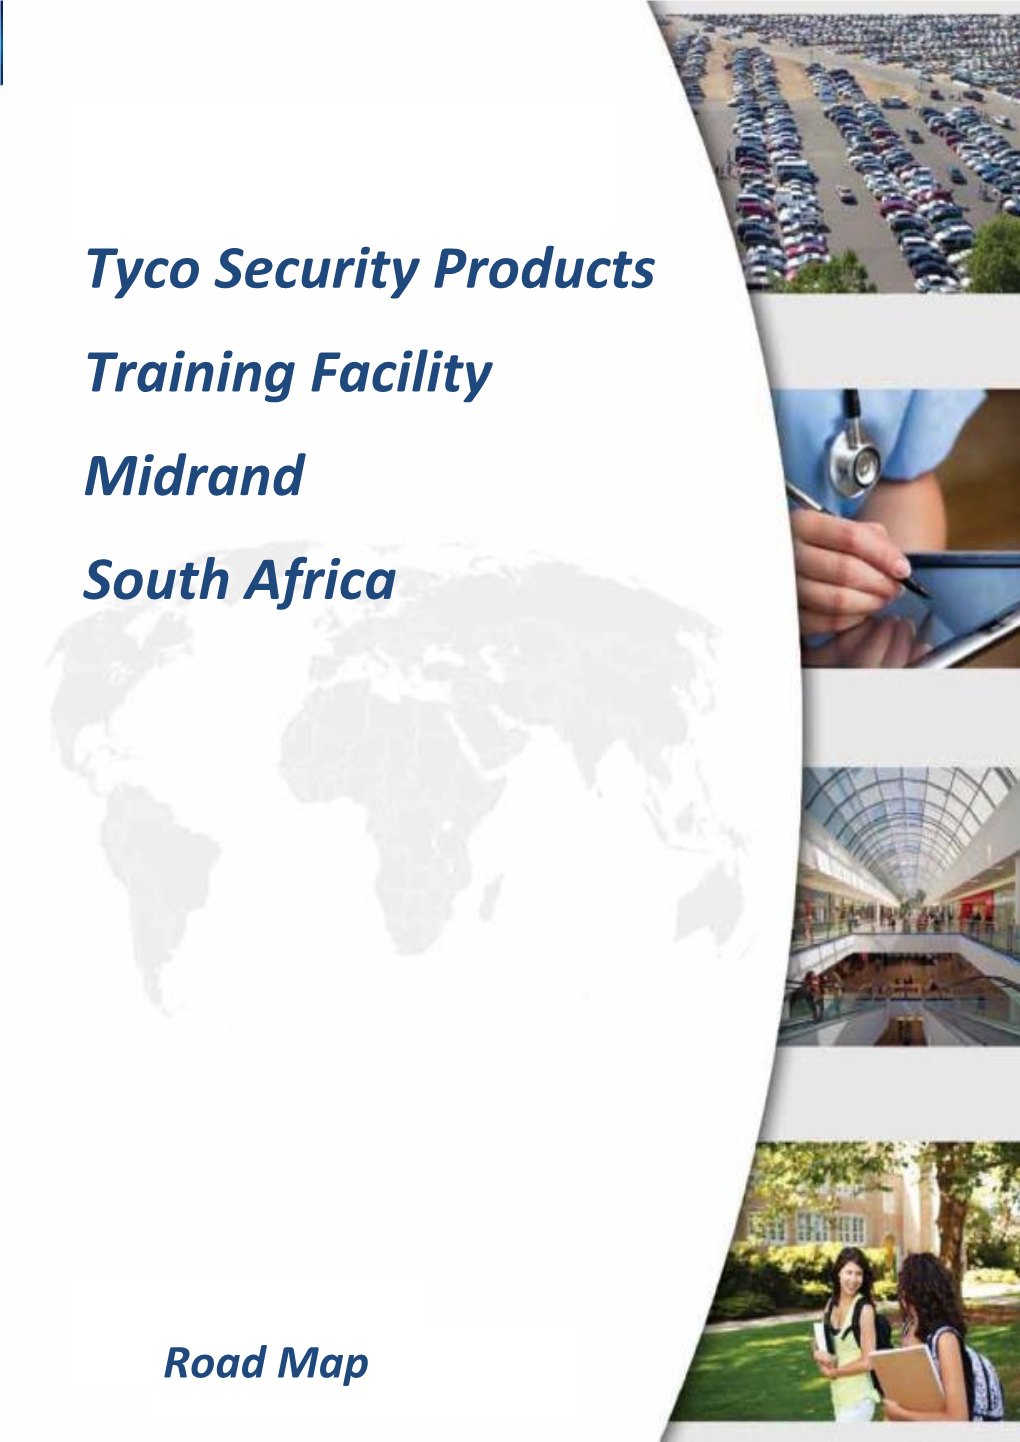 Tyco Security Products Training Facility Midrand South Africa